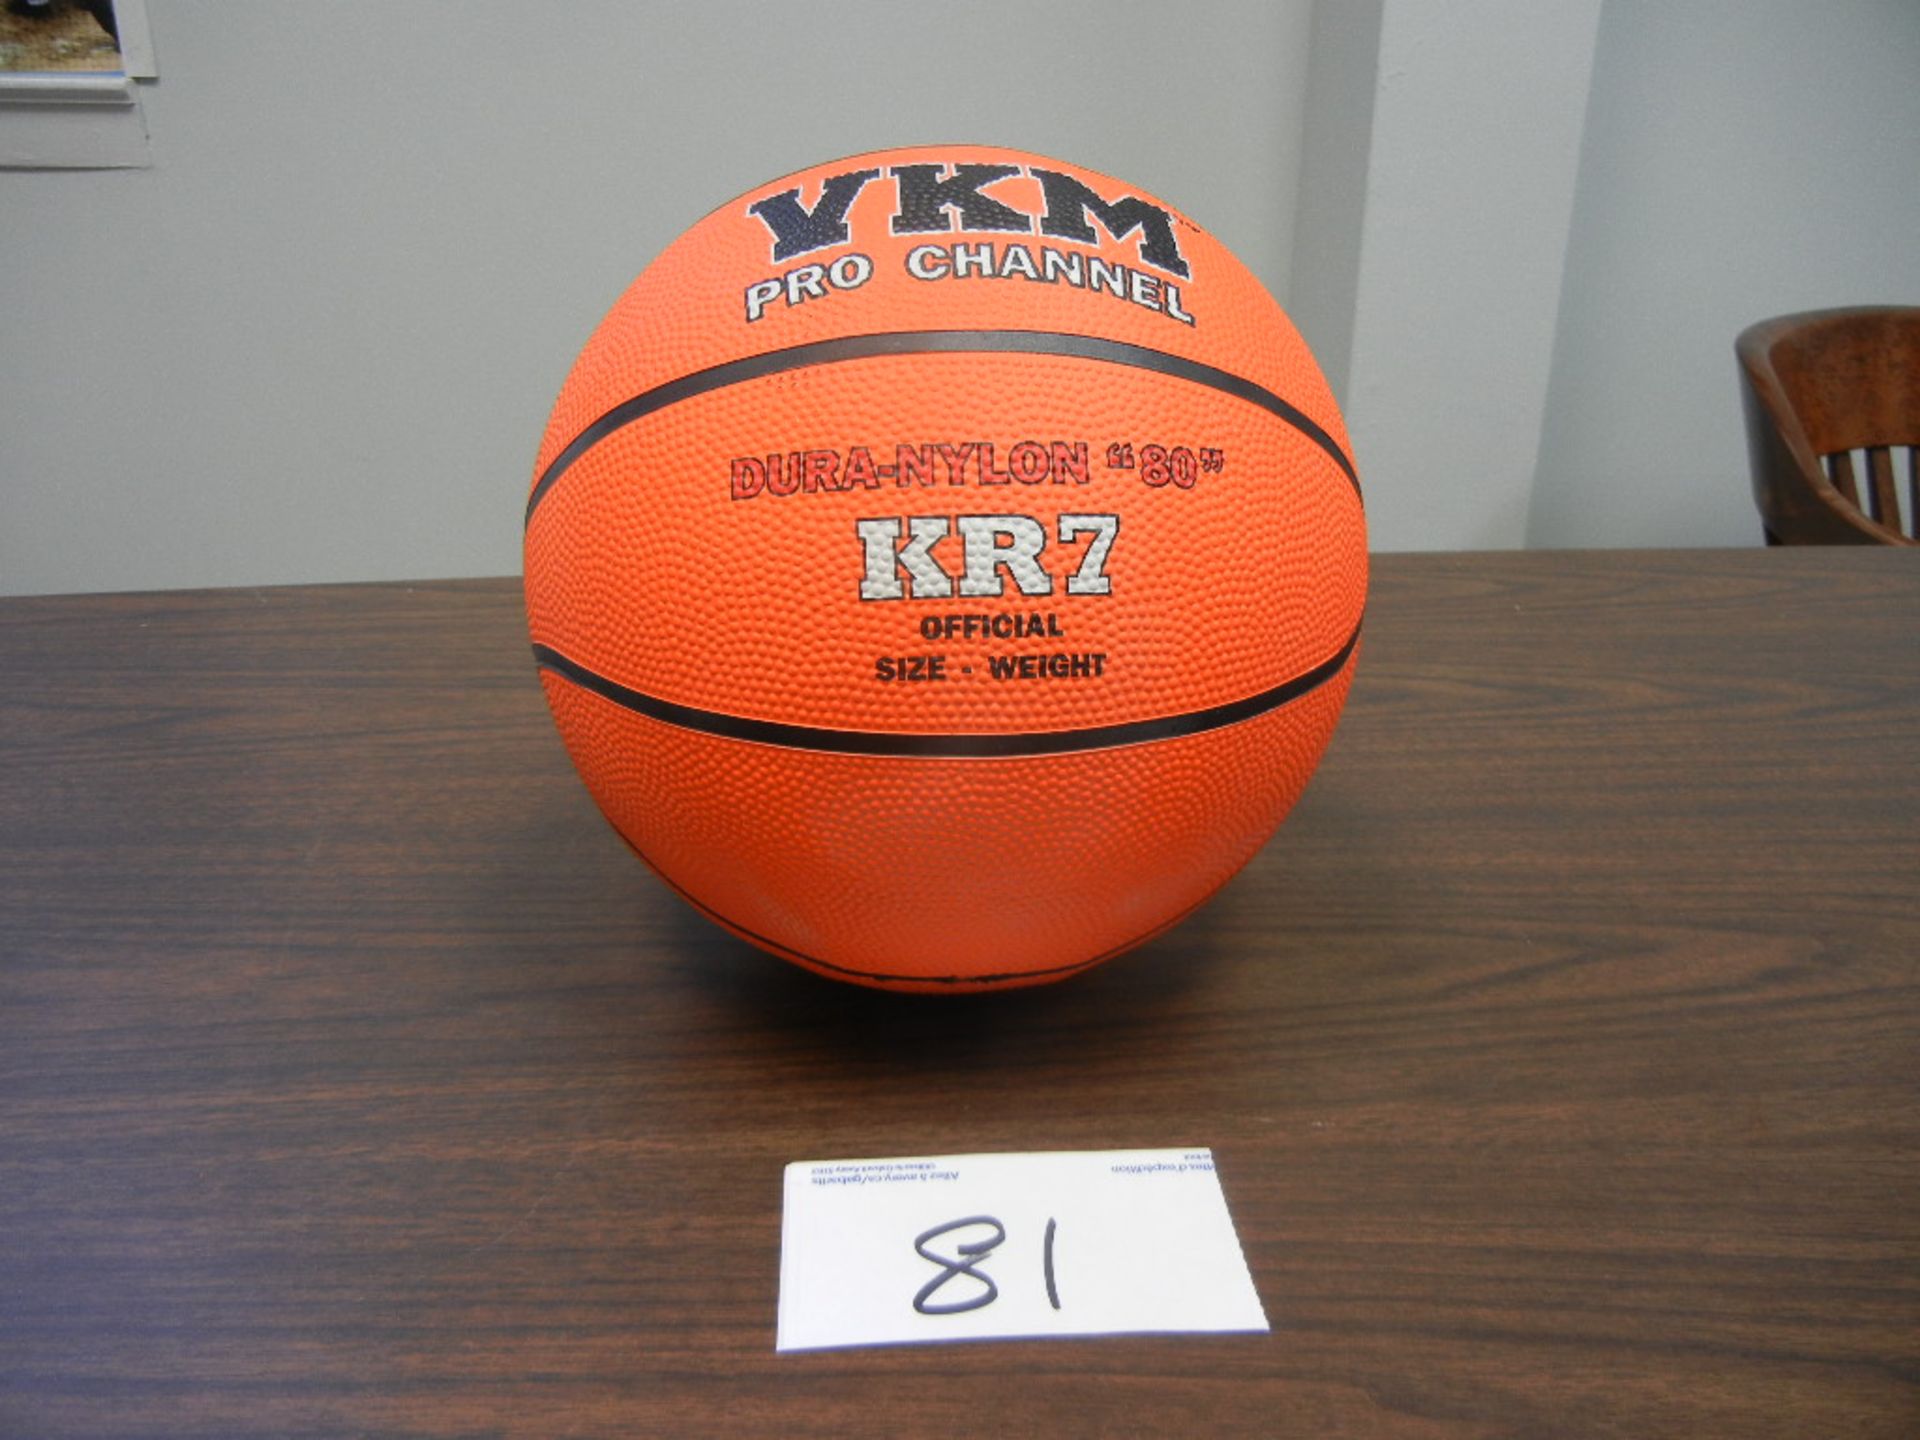 High Quality,Rubber Cover, Official International Size 7 Basketball VKM#KR7